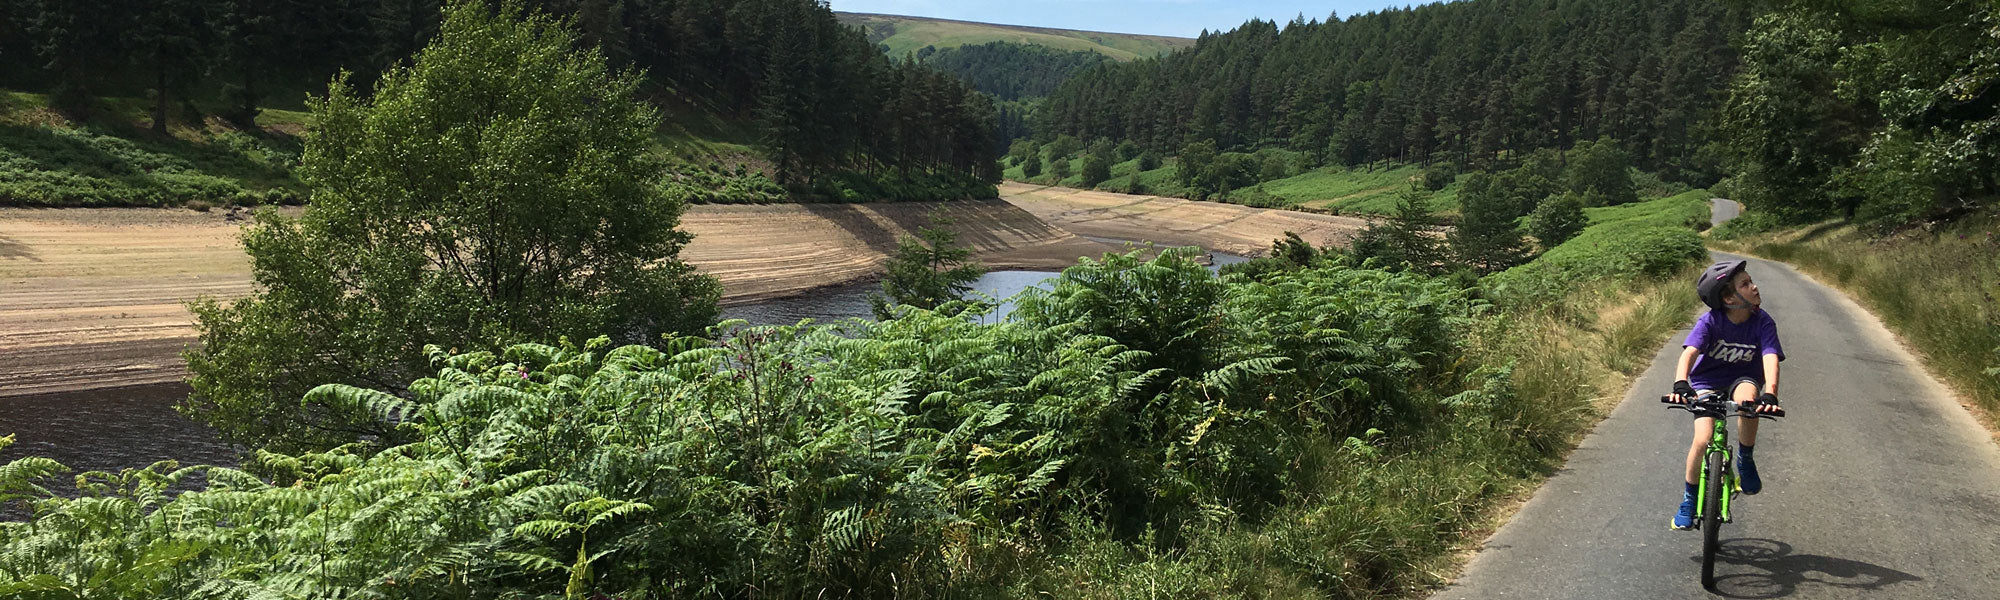 Cycling around the Derwent reservoirs in the Peak District, taken from Traffic-Free Cycle Trails by Nick Cotton